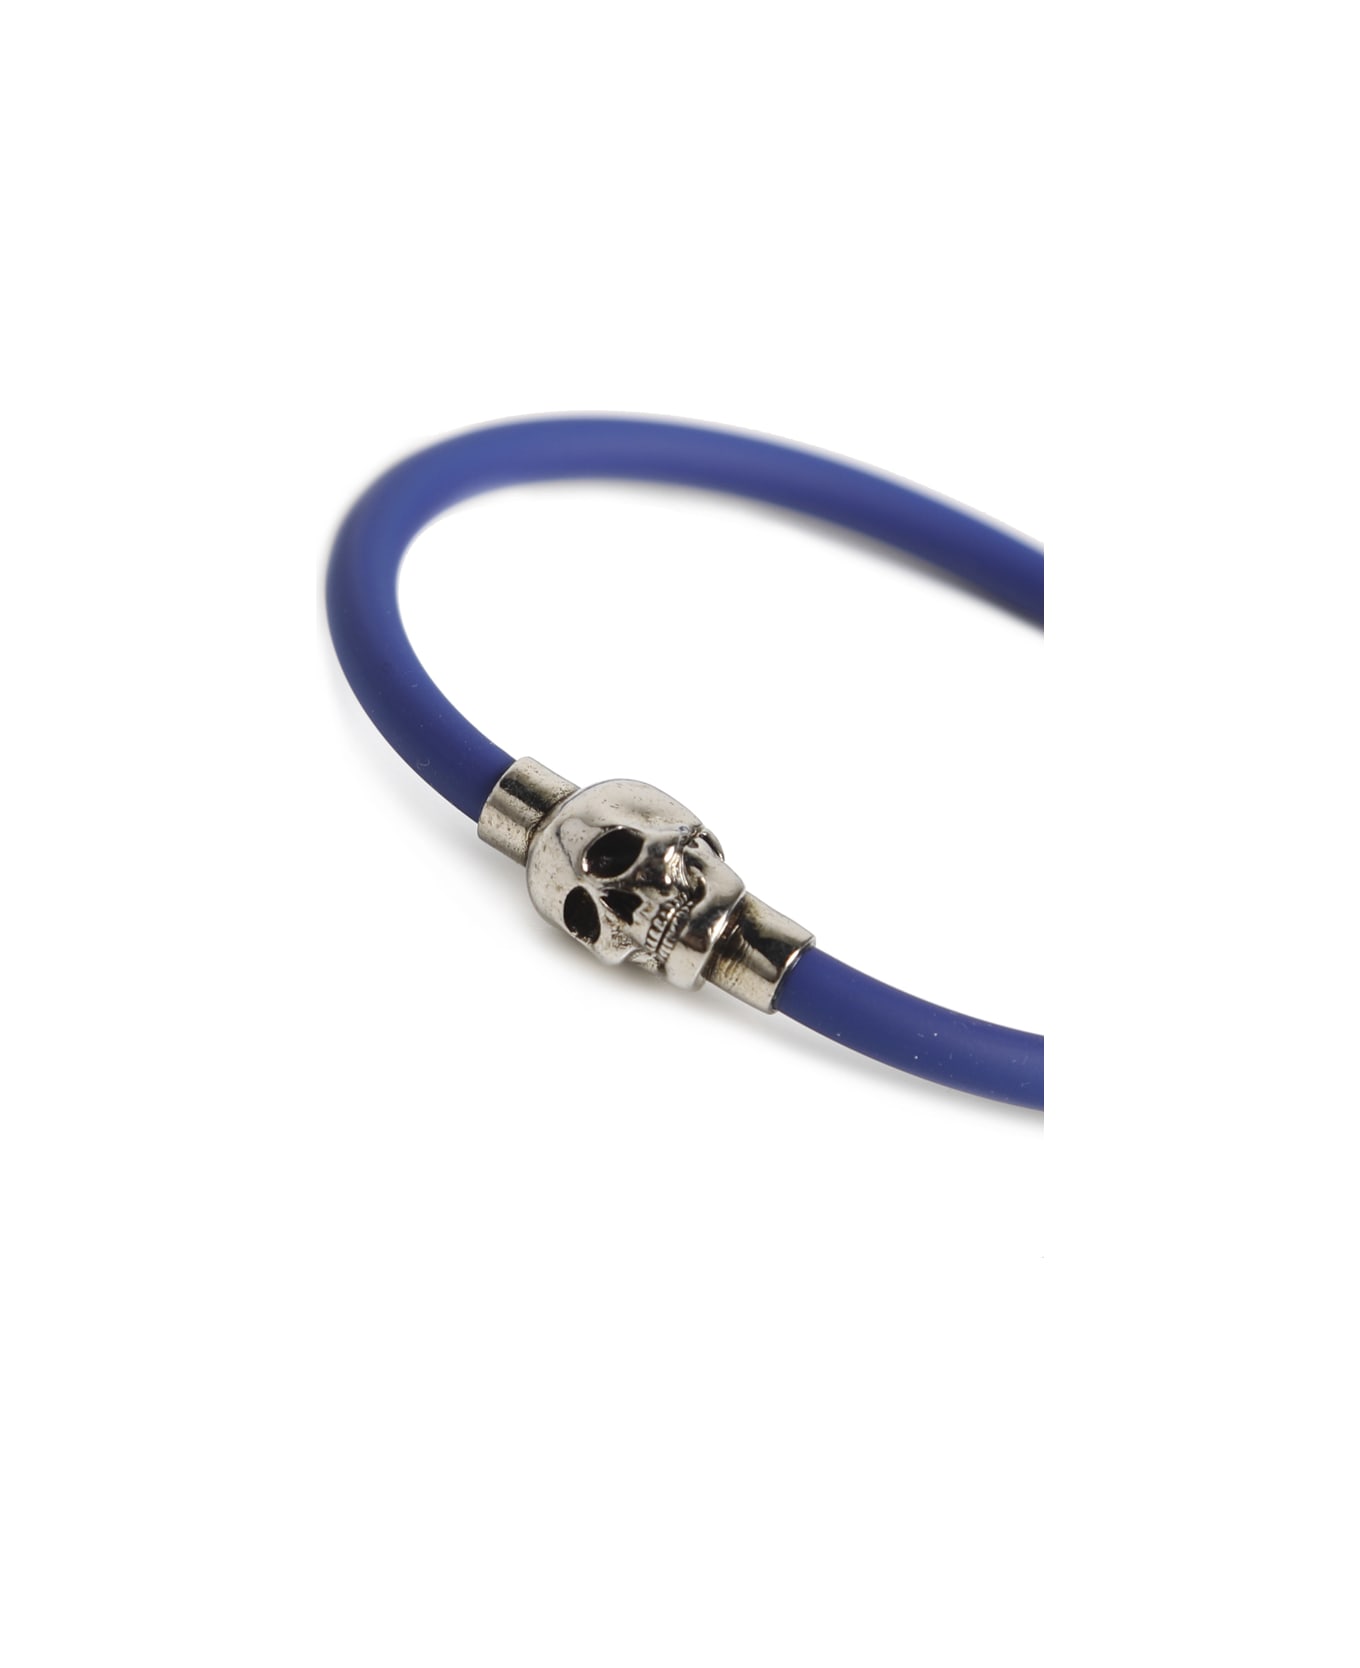 Alexander McQueen Rubber Skull Bracelet - Electric blue/a.sil ブレスレット